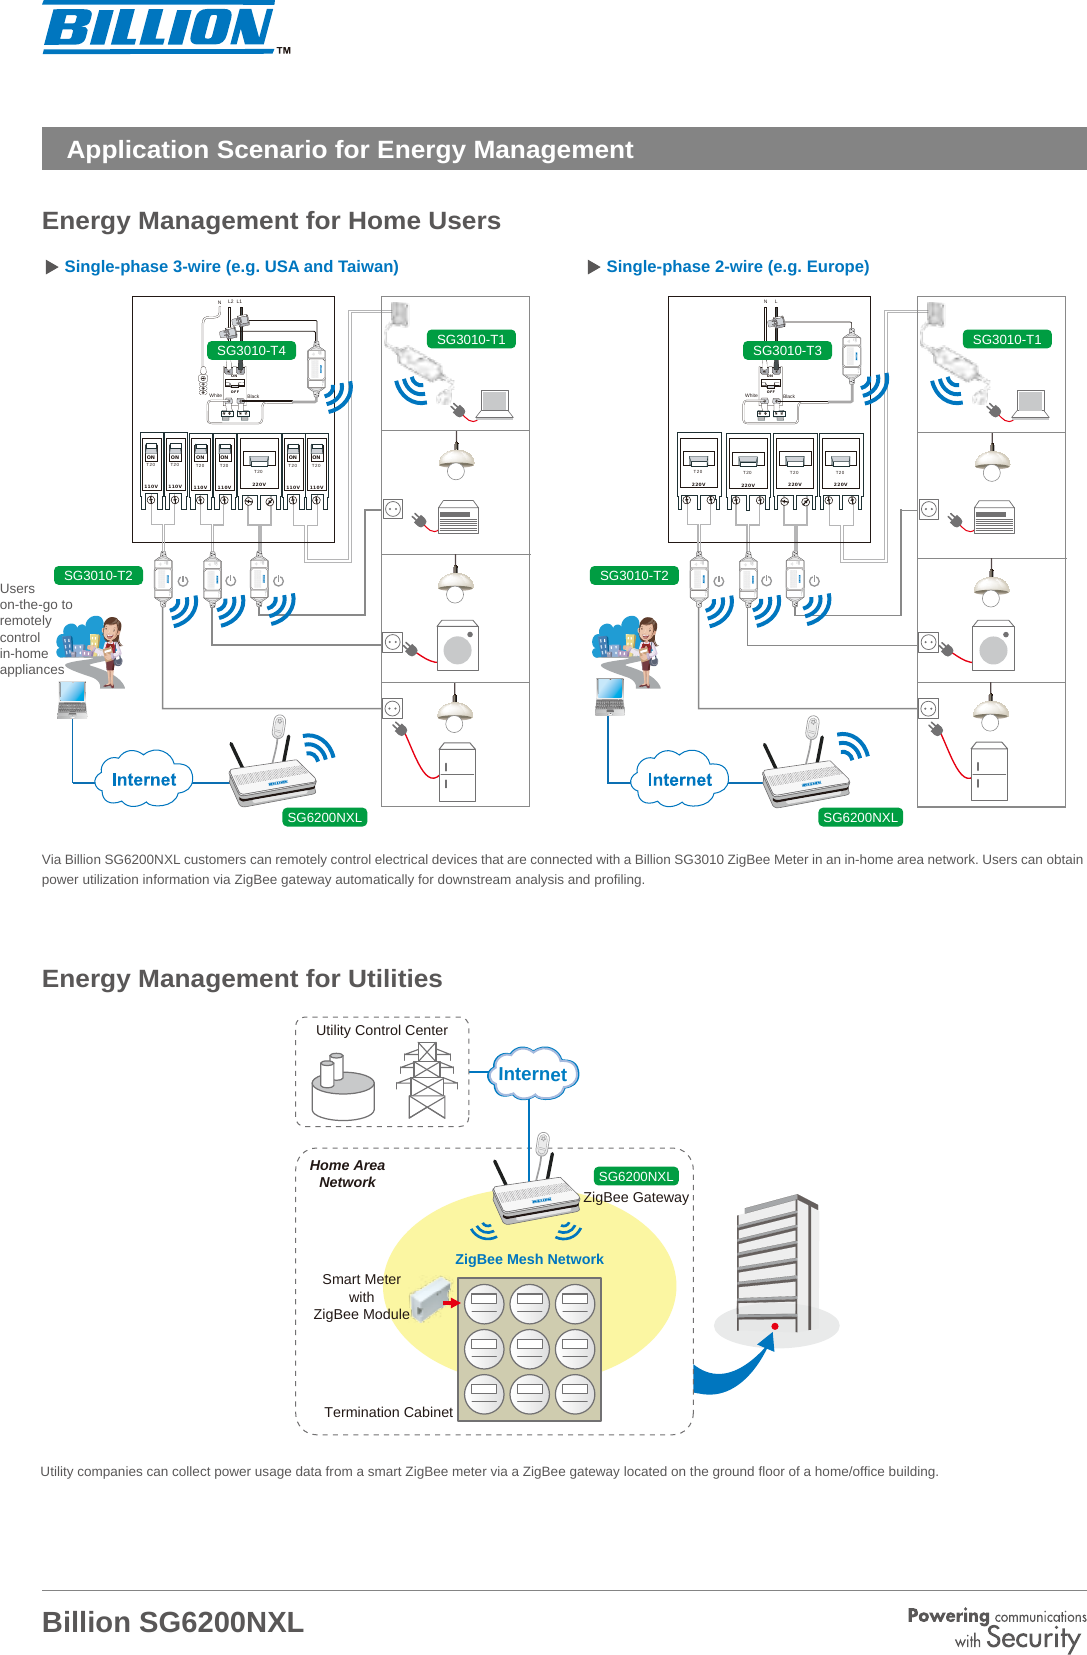 Application Scenario for Energy Management Energy Management for Home UsersVia Billion SG6200NXL customers can remotely control electrical devices that are connected with a Billion SG3010 ZigBee Meter in an in-home area network. Users can obtain power utilization information via ZigBee gateway automatically for downstream analysis and profiling.Energy Management for UtilitiesUtility companies can collect power usage data from a smart ZigBee meter via a ZigBee gateway located on the ground floor of a home/office building.Single-phase 3-wire (e.g. USA and Taiwan) Single-phase 2-wire (e.g. Europe)Billion SG6200NXLUsers on-the-go to remotely control in-home  appliances Home AreaNetworkInternetUtility Control CenterZigBee Mesh NetworkSmart MeterwithZigBee ModuleTermination CabinetZigBee GatewayONT20110VONT20110VONT20110VONT20110VT20220VOFFONBlackWhiteL2 L1ONT20110VONT20110V1 wh/pStatus1 wh/pStatus1 wh/pStatusN1 wh/pStatusSG6200NXLSG3010-T2SG3010-T1SG3010-T4SG6200NXLSG6200NXLSG3010-T2SG3010-T1T20220VOFFONBlackWhiteN L1 wh/pStatus1 wh/pStatus1 wh/pStatus1 wh/pStatusT20220VT20220VT20220VSG3010-T3